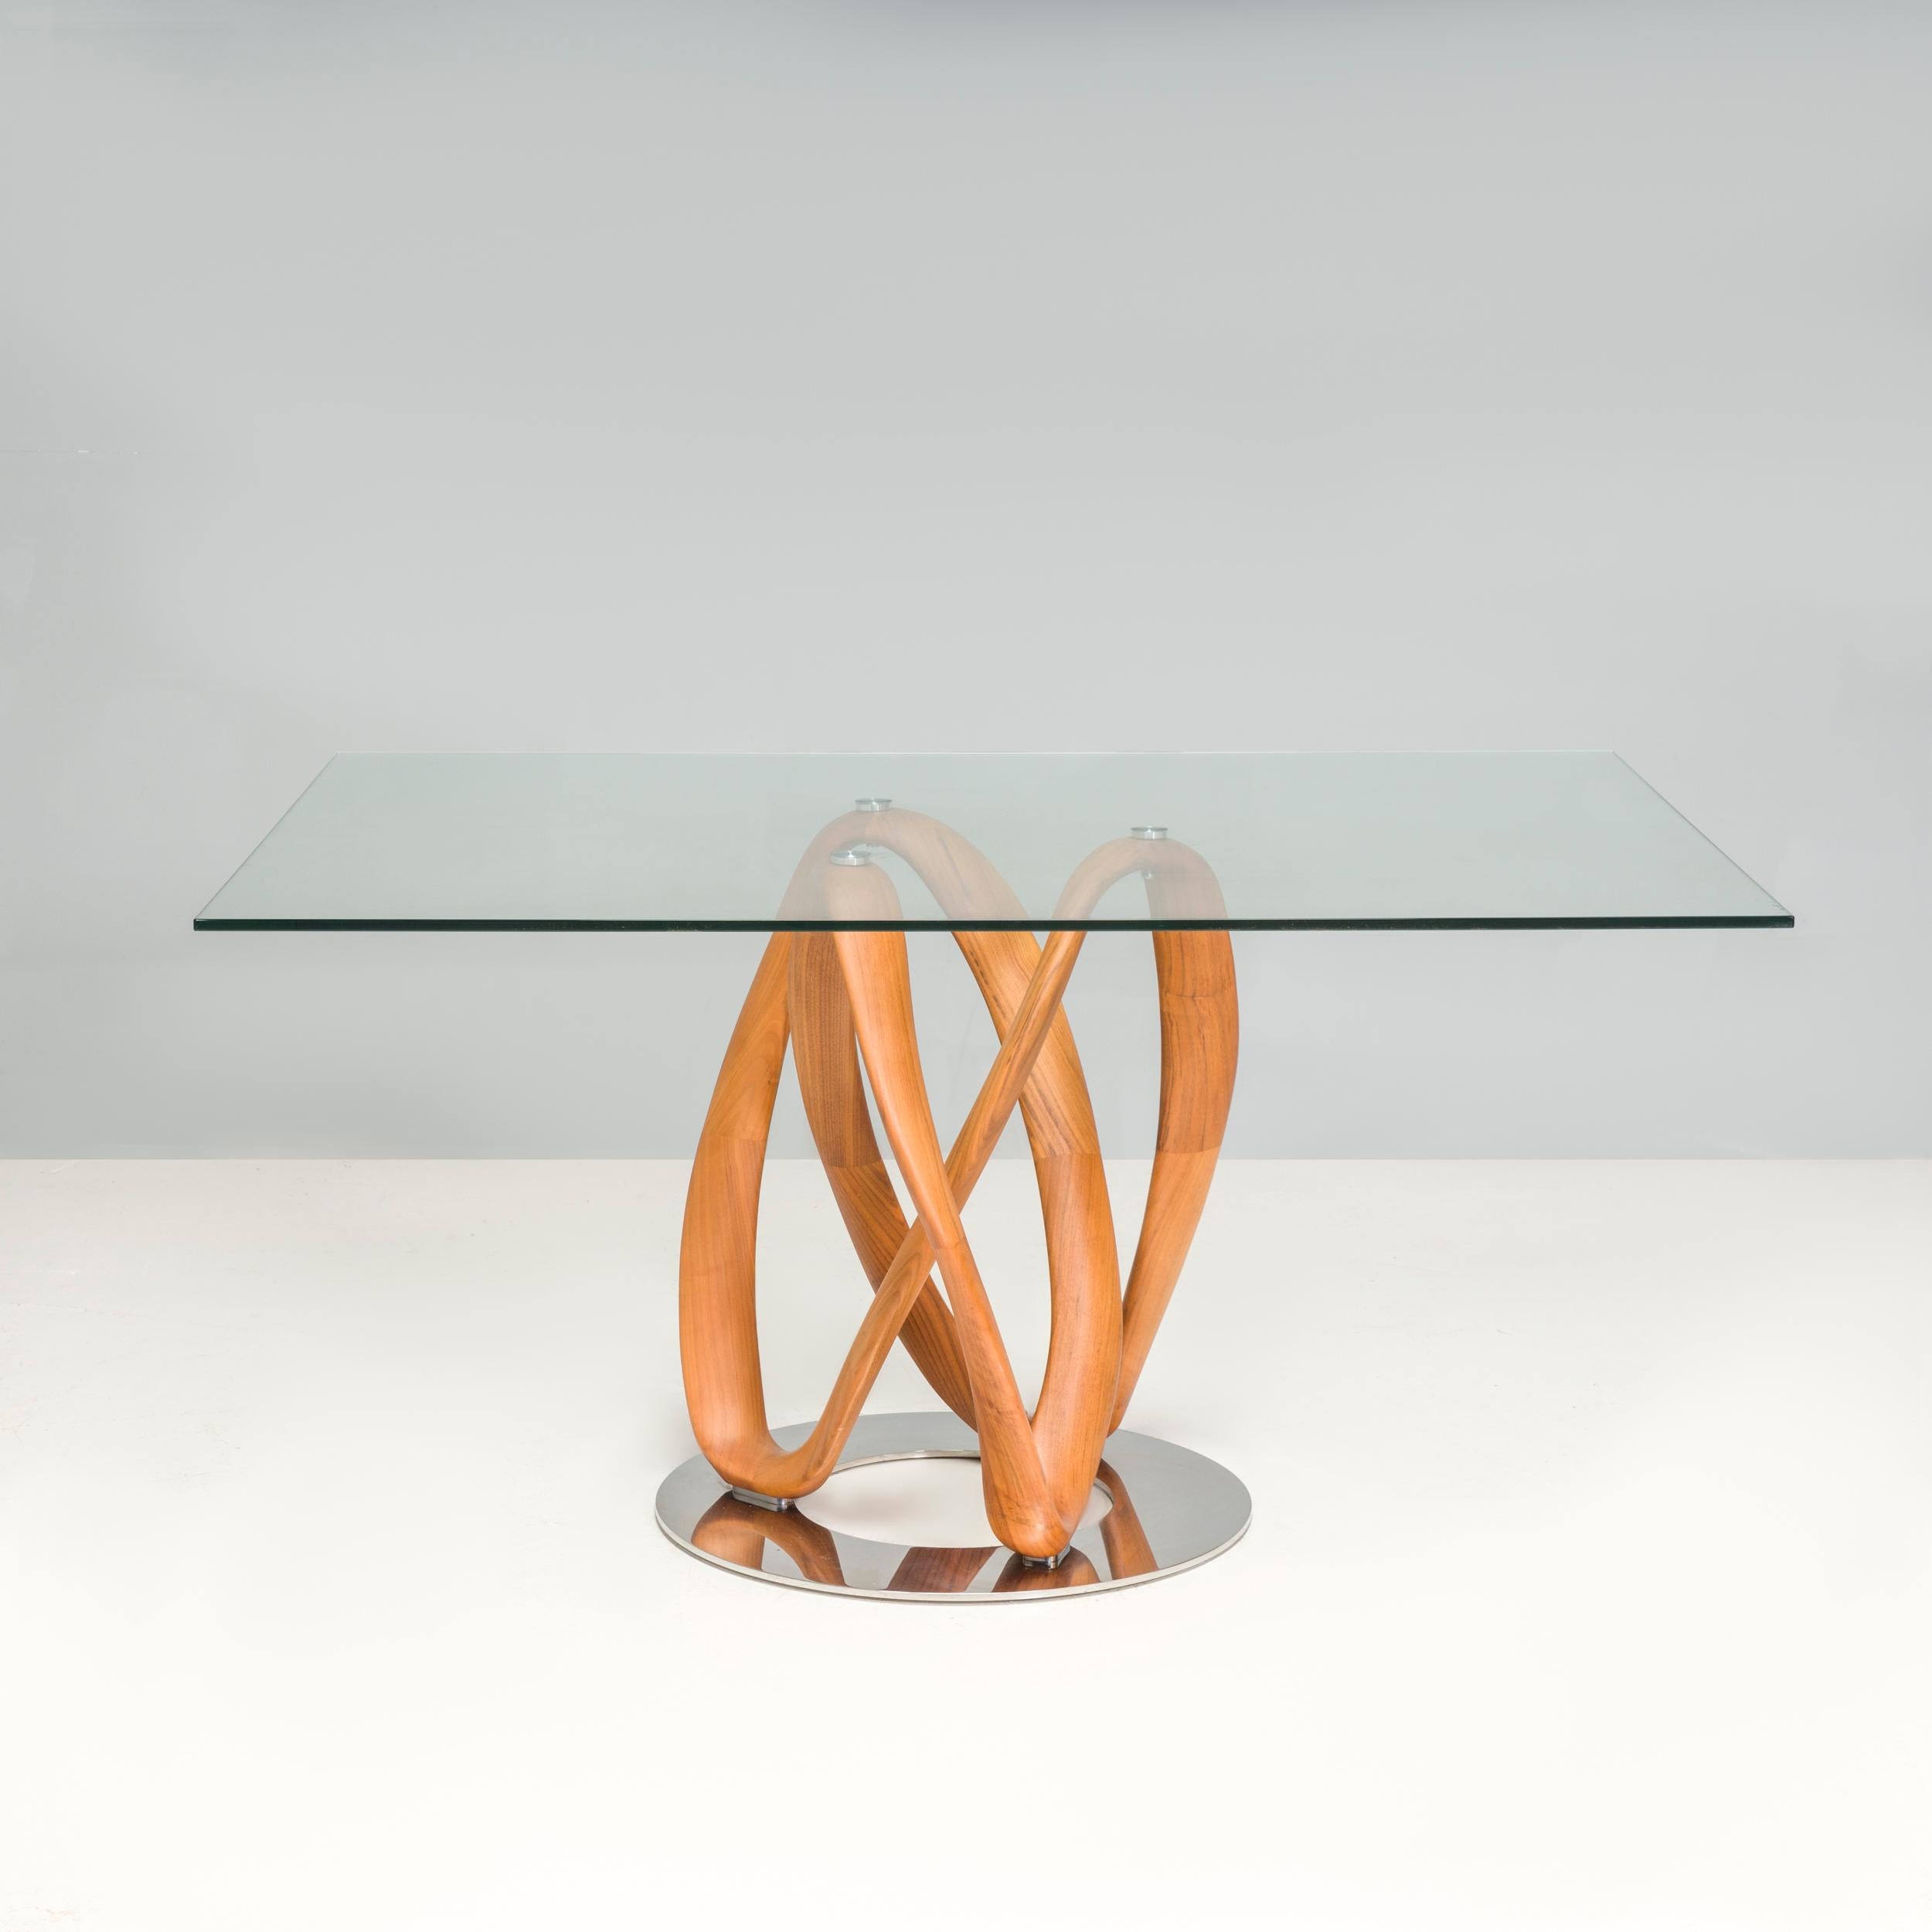 Designed by Stefano Bigi for Porada in 2009, the infinity table is intricately handcrafted in Porada’s Brianza workshop. The table is constructed from a Canaletta walnut base with a twisted shape that gives the impression of dynamic, growing tree